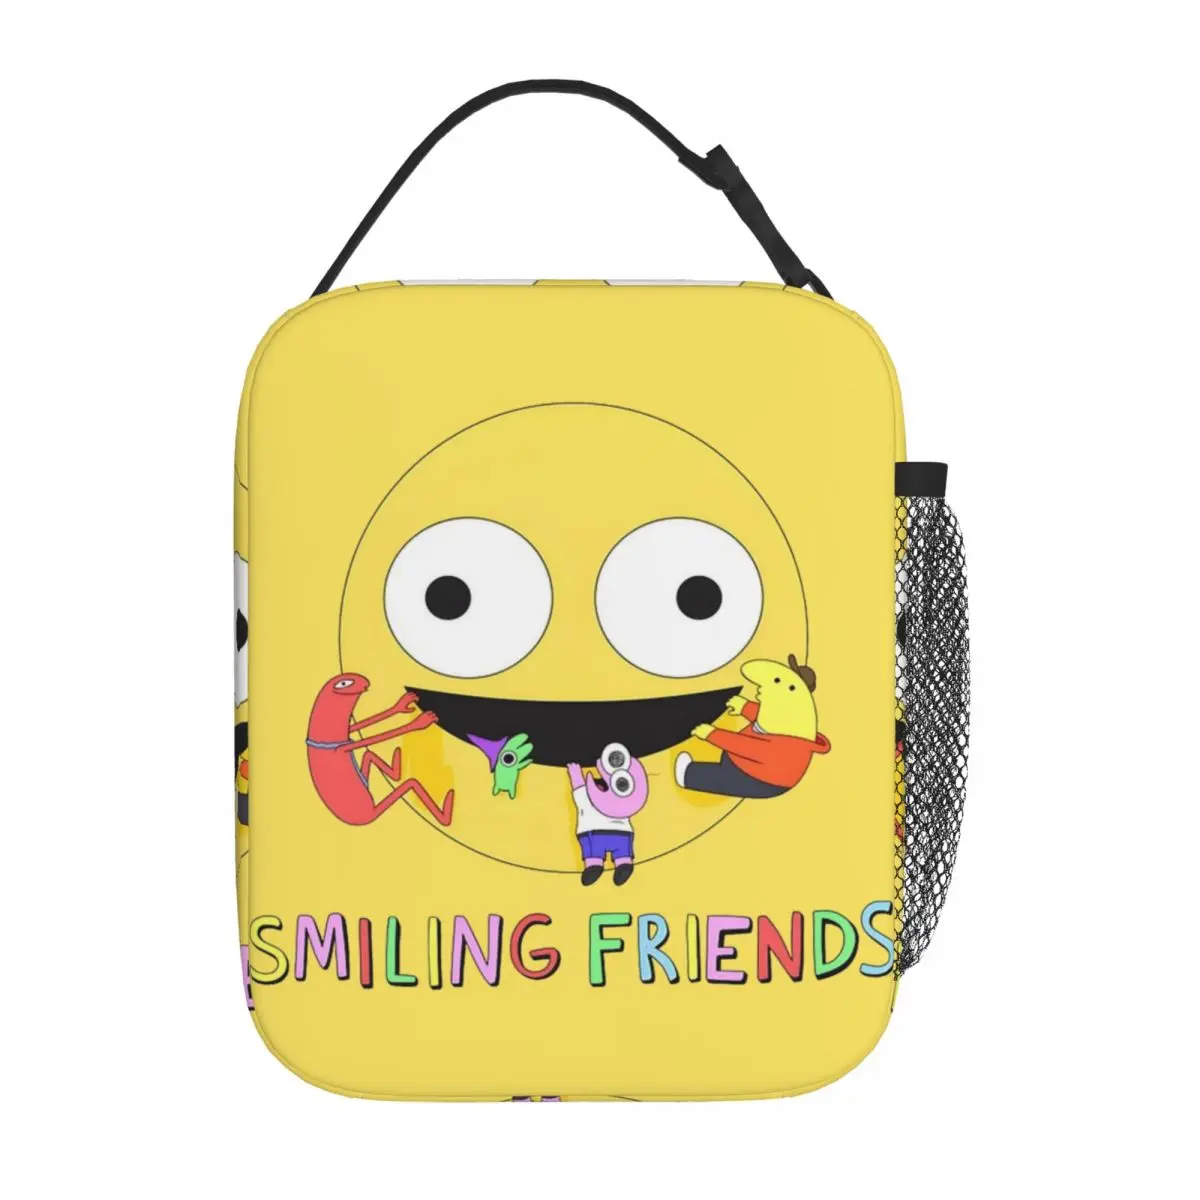 

Funny Smiling Friends Logo Thermal Insulated Lunch Bag for School Cartoon Adult Swim Portable Food Bag Cooler Thermal Lunch Box